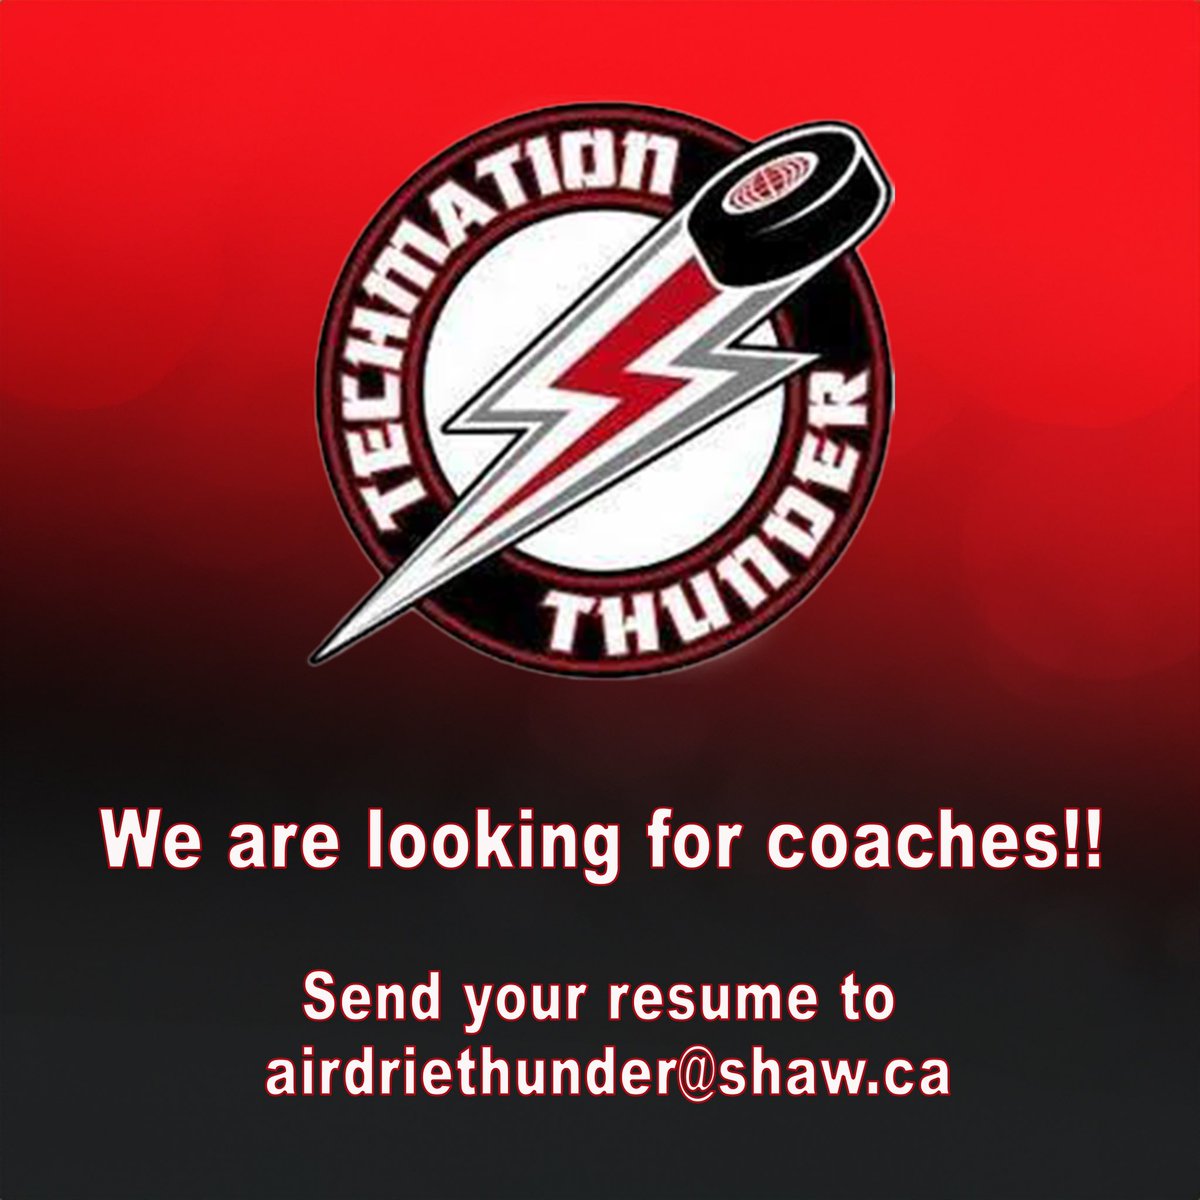 We are in search of coaches to add to the roster! If you are interested, please send your resume to airdriethunder@shaw.ca 🏒 #airdriethunder